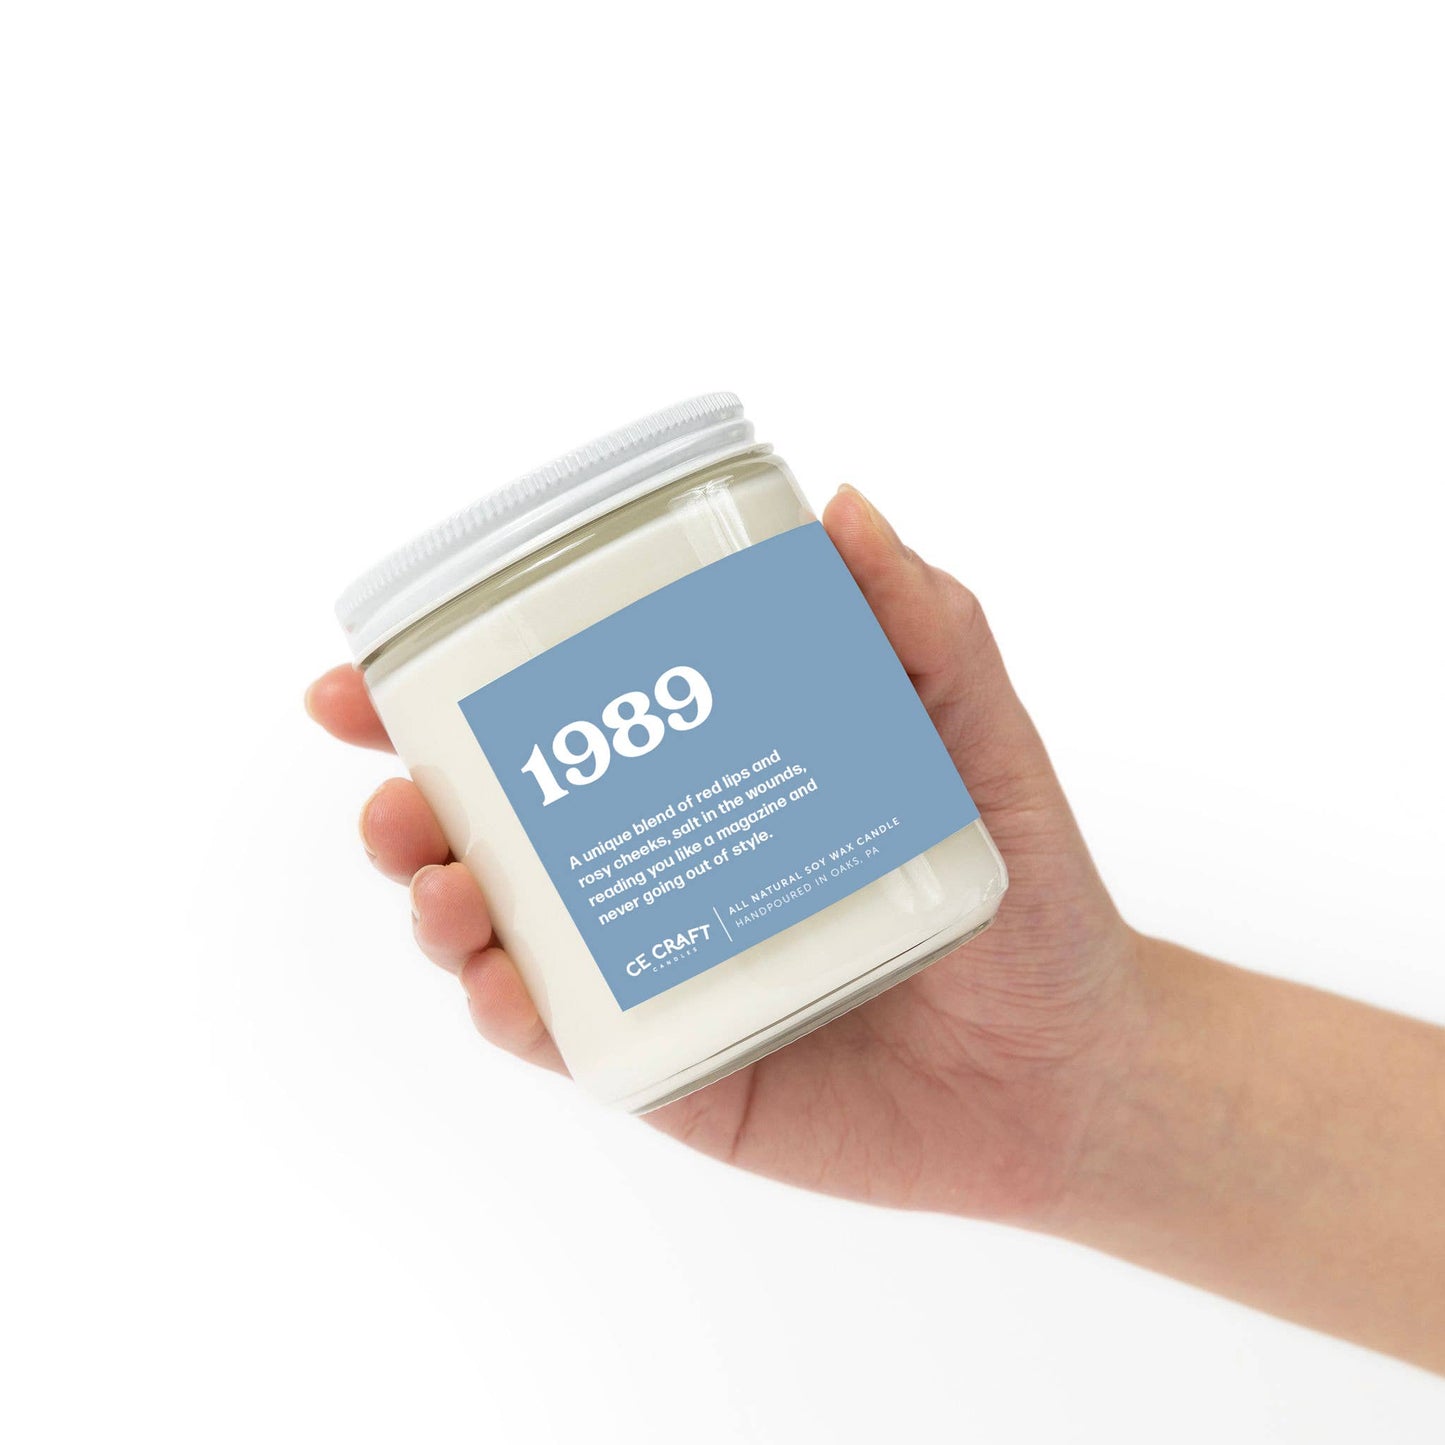 1989 Scented Candle